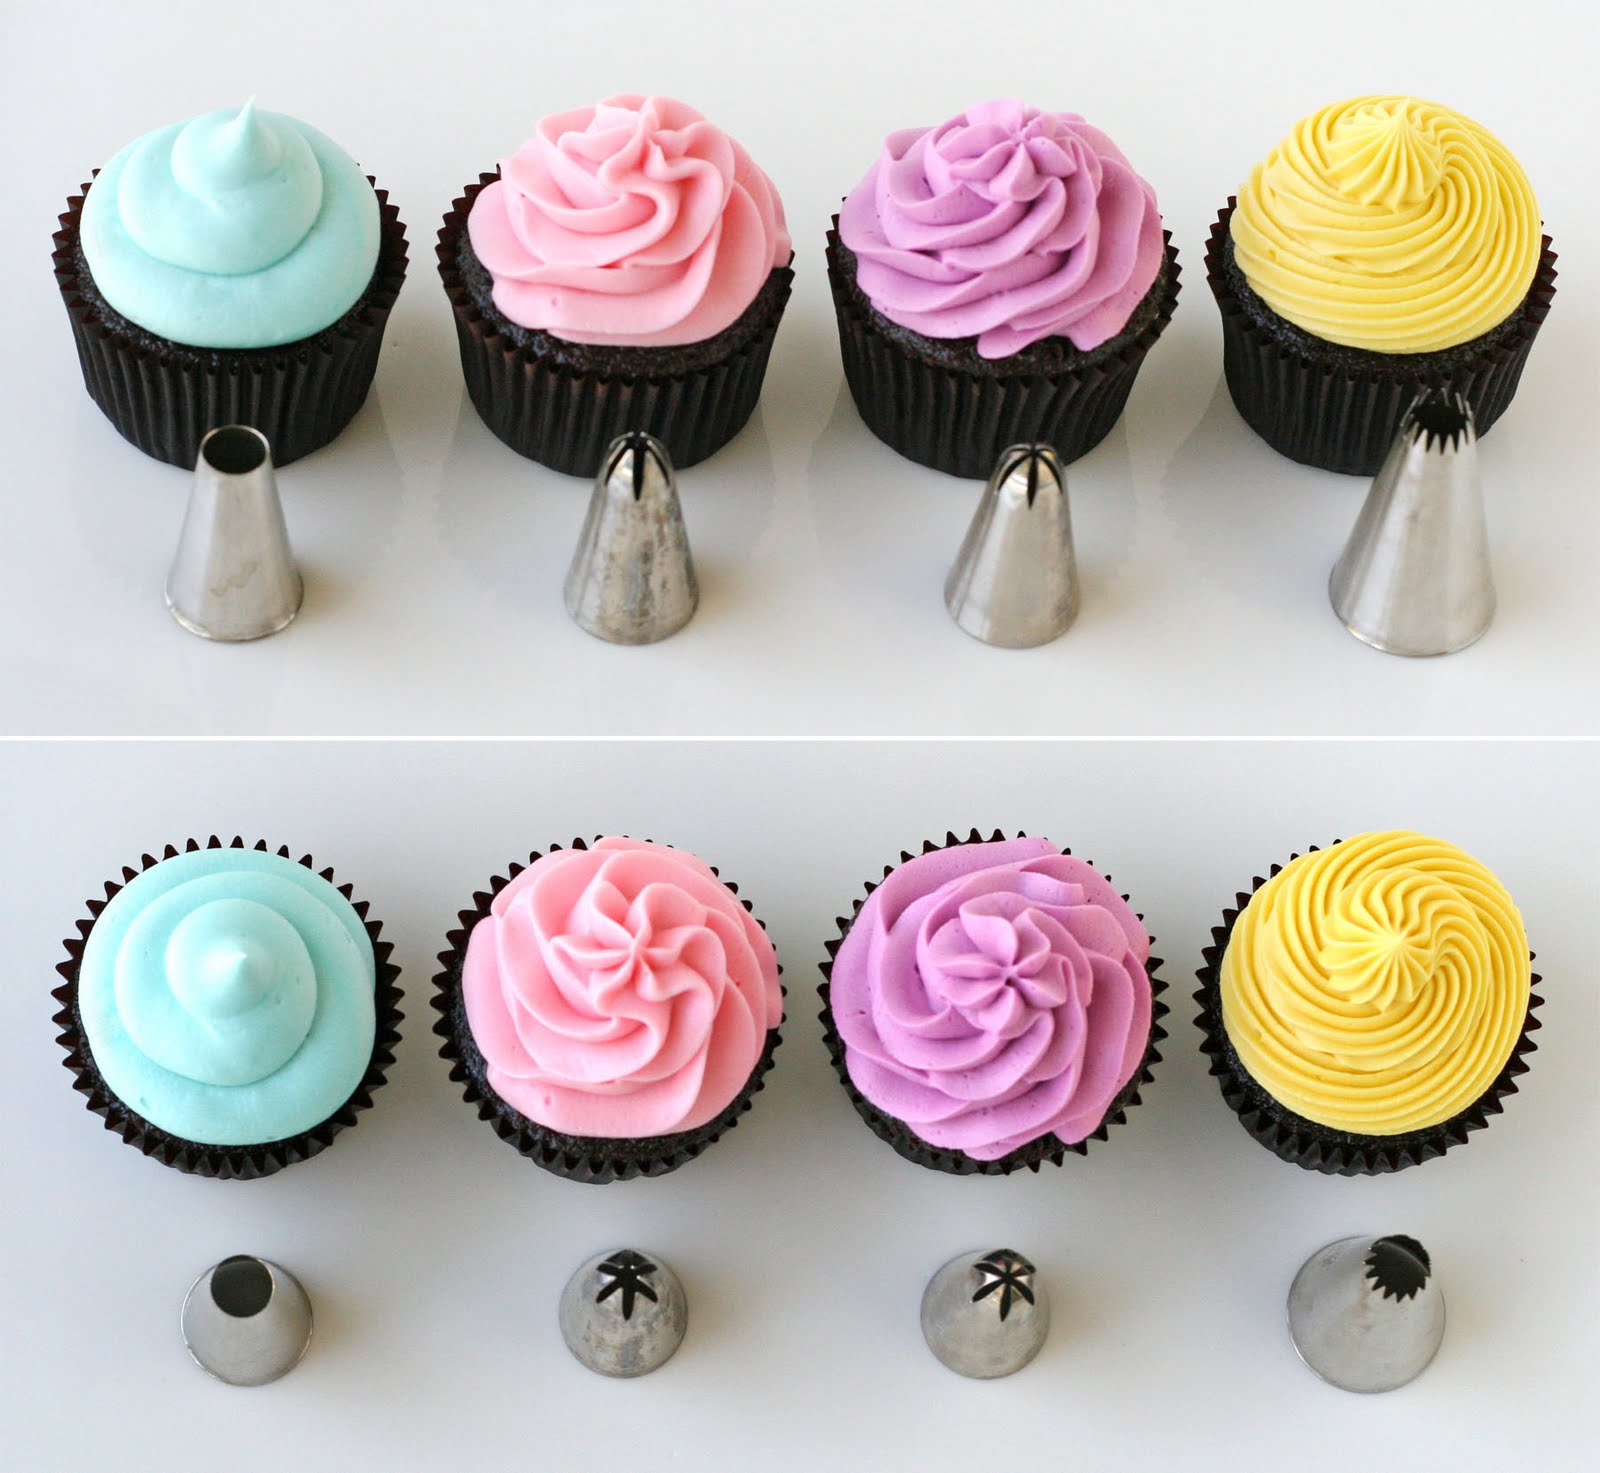 Wilton Icing Recipes For Cupcakes